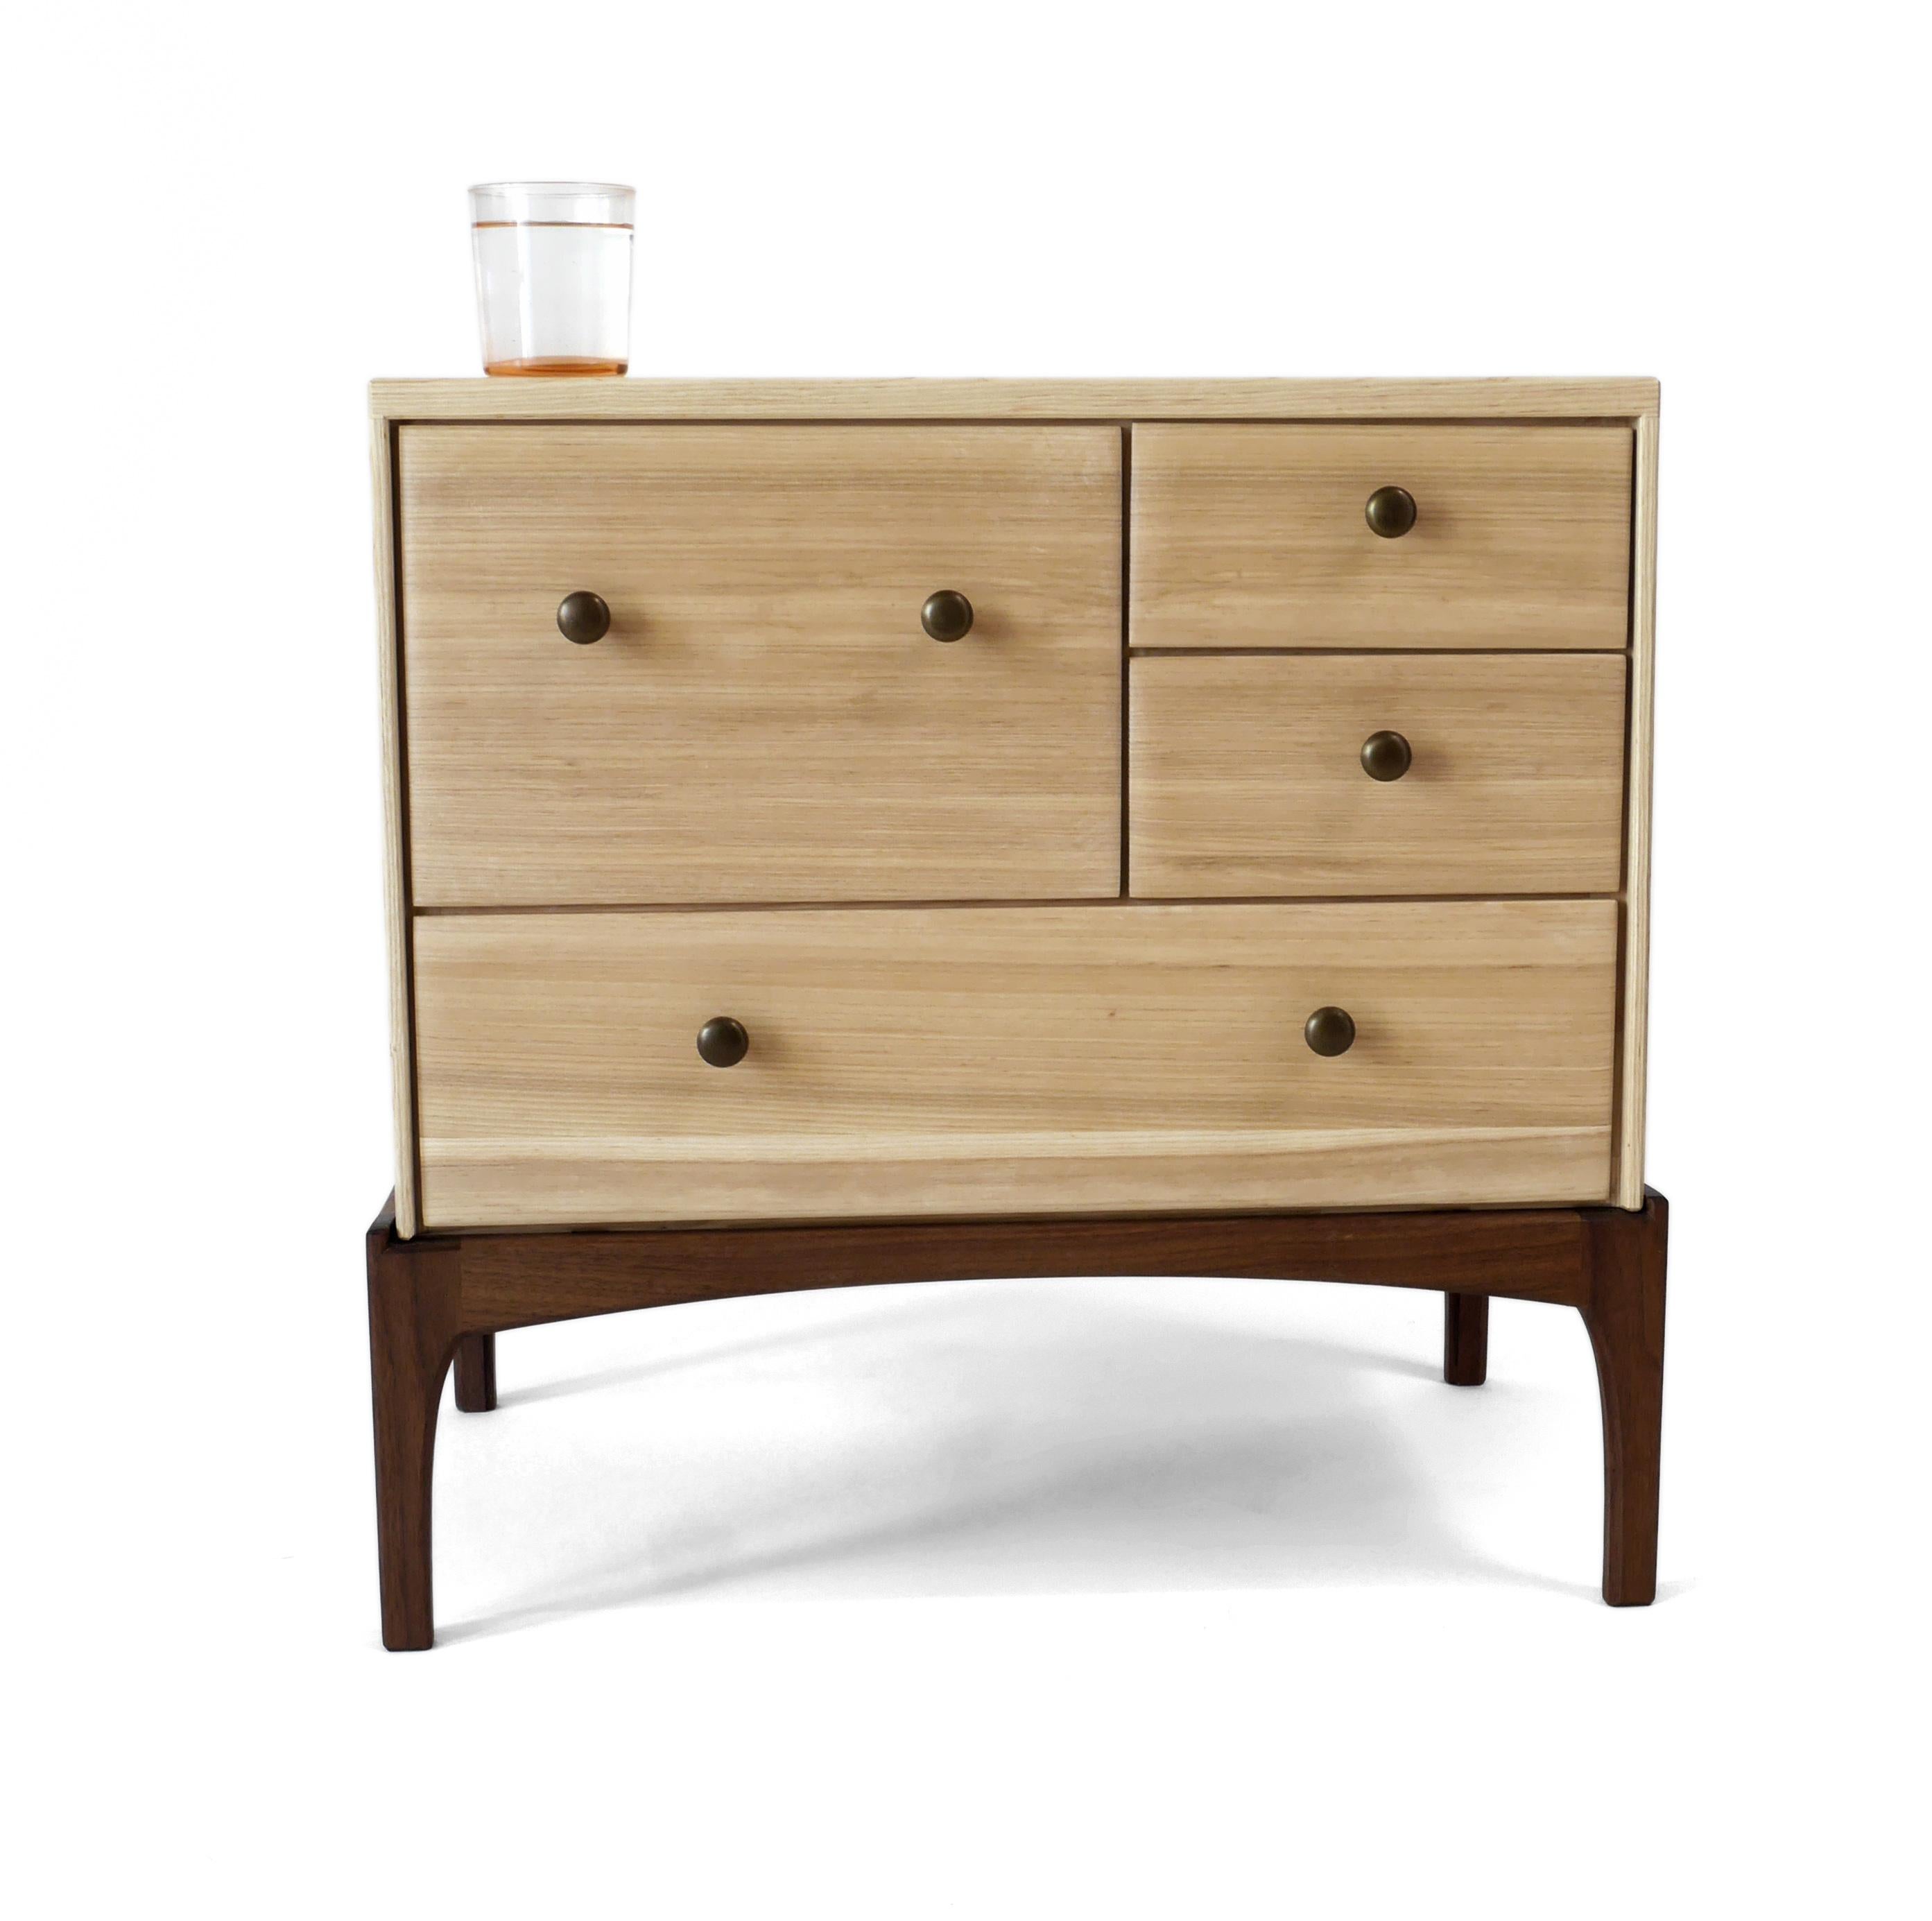 We have one of these in stock, available for immediate shipment.

The stunning Arora Nightstand is built of solid ash hardwood with a black walnut stand. It has four drawers that all run on the finest soft closing ball bearing glides and is built